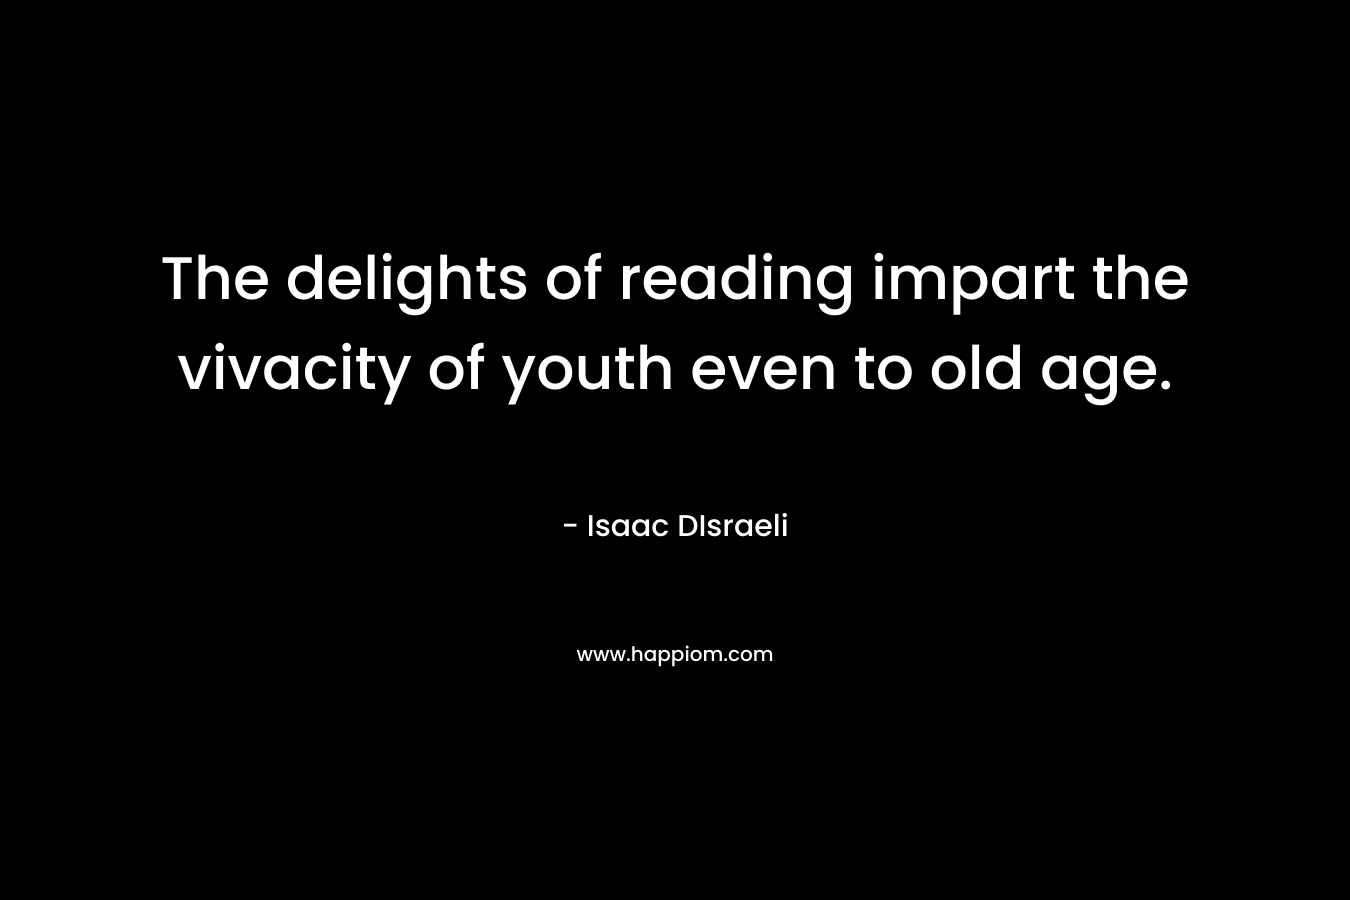 The delights of reading impart the vivacity of youth even to old age.